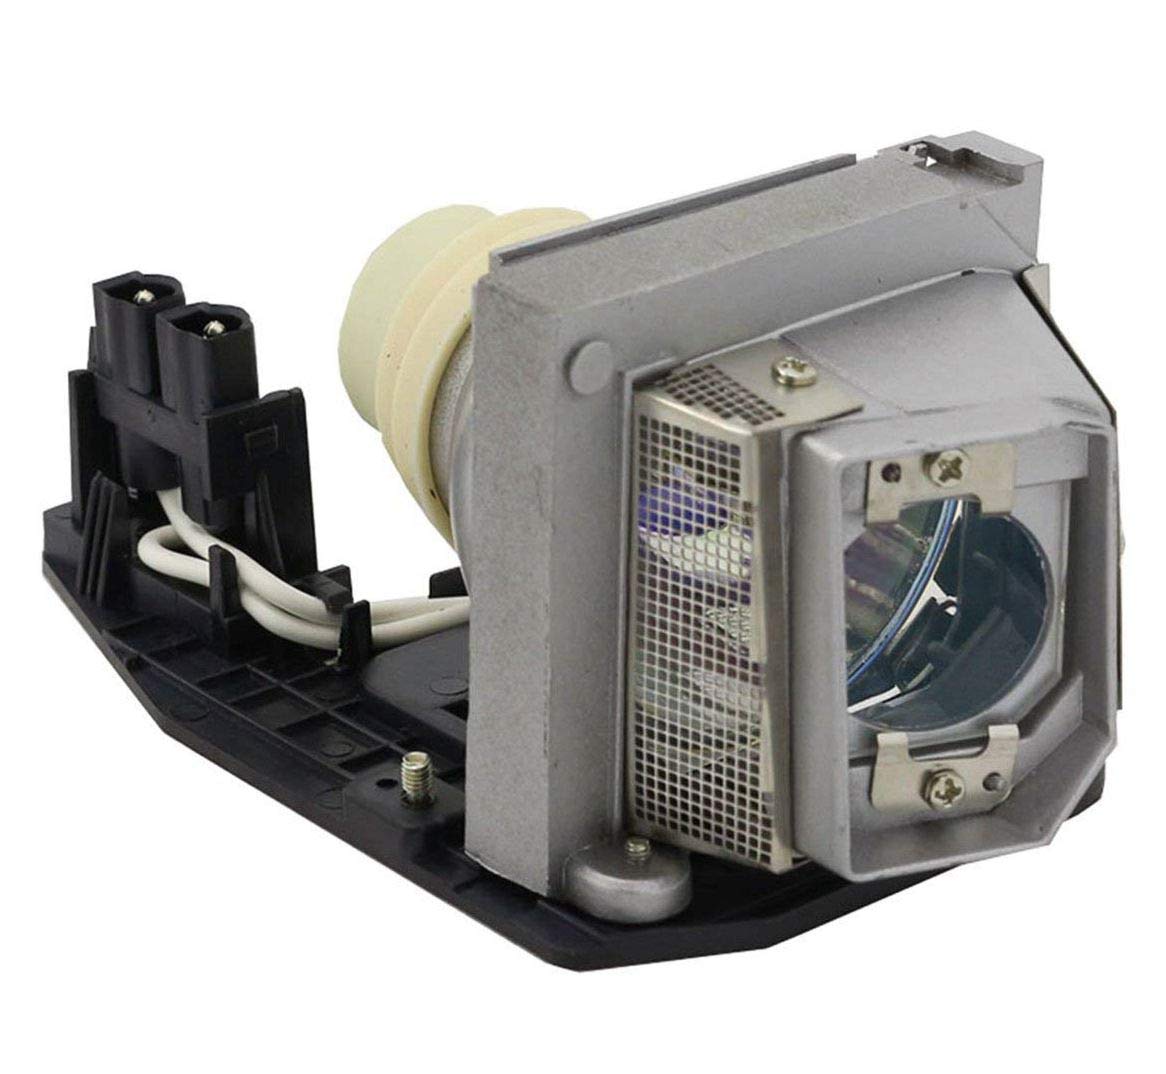 330-6581 / 725-10229 / GL464 Replacement Projector Lamp Module for DELL 1510X / 1610X / 1610HD Projectors